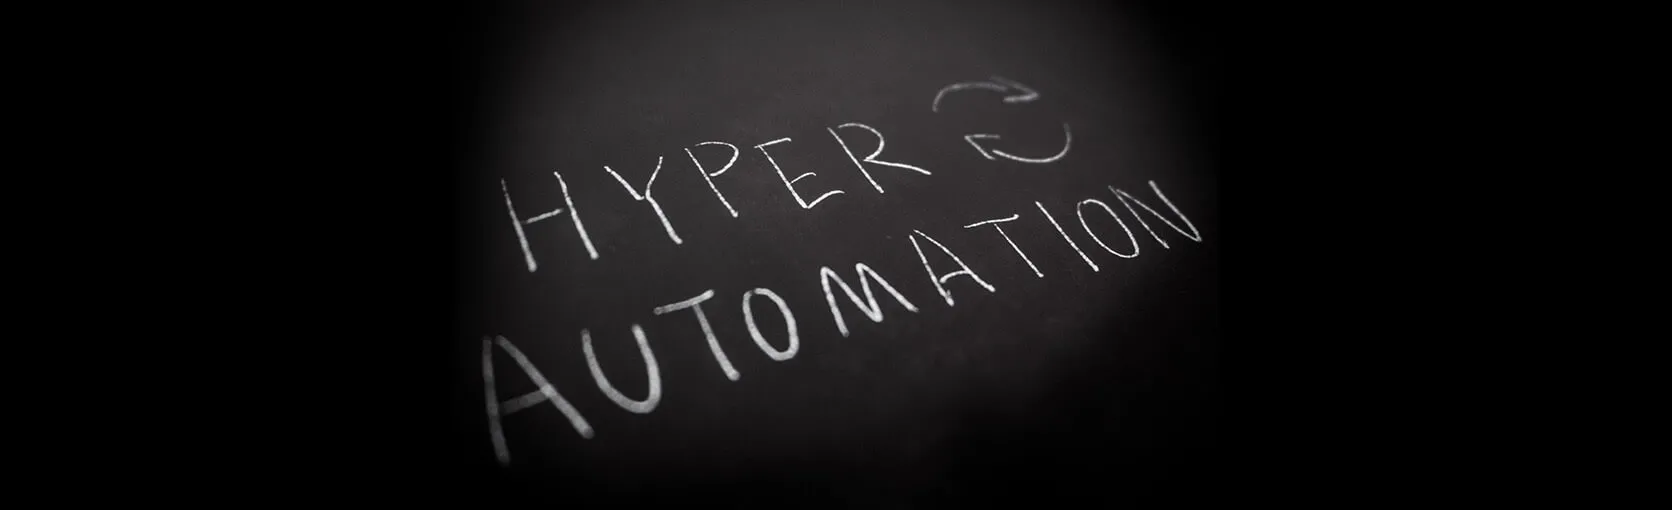 Automation Vs Hyperautomation: Which One Is Right For Your Business?